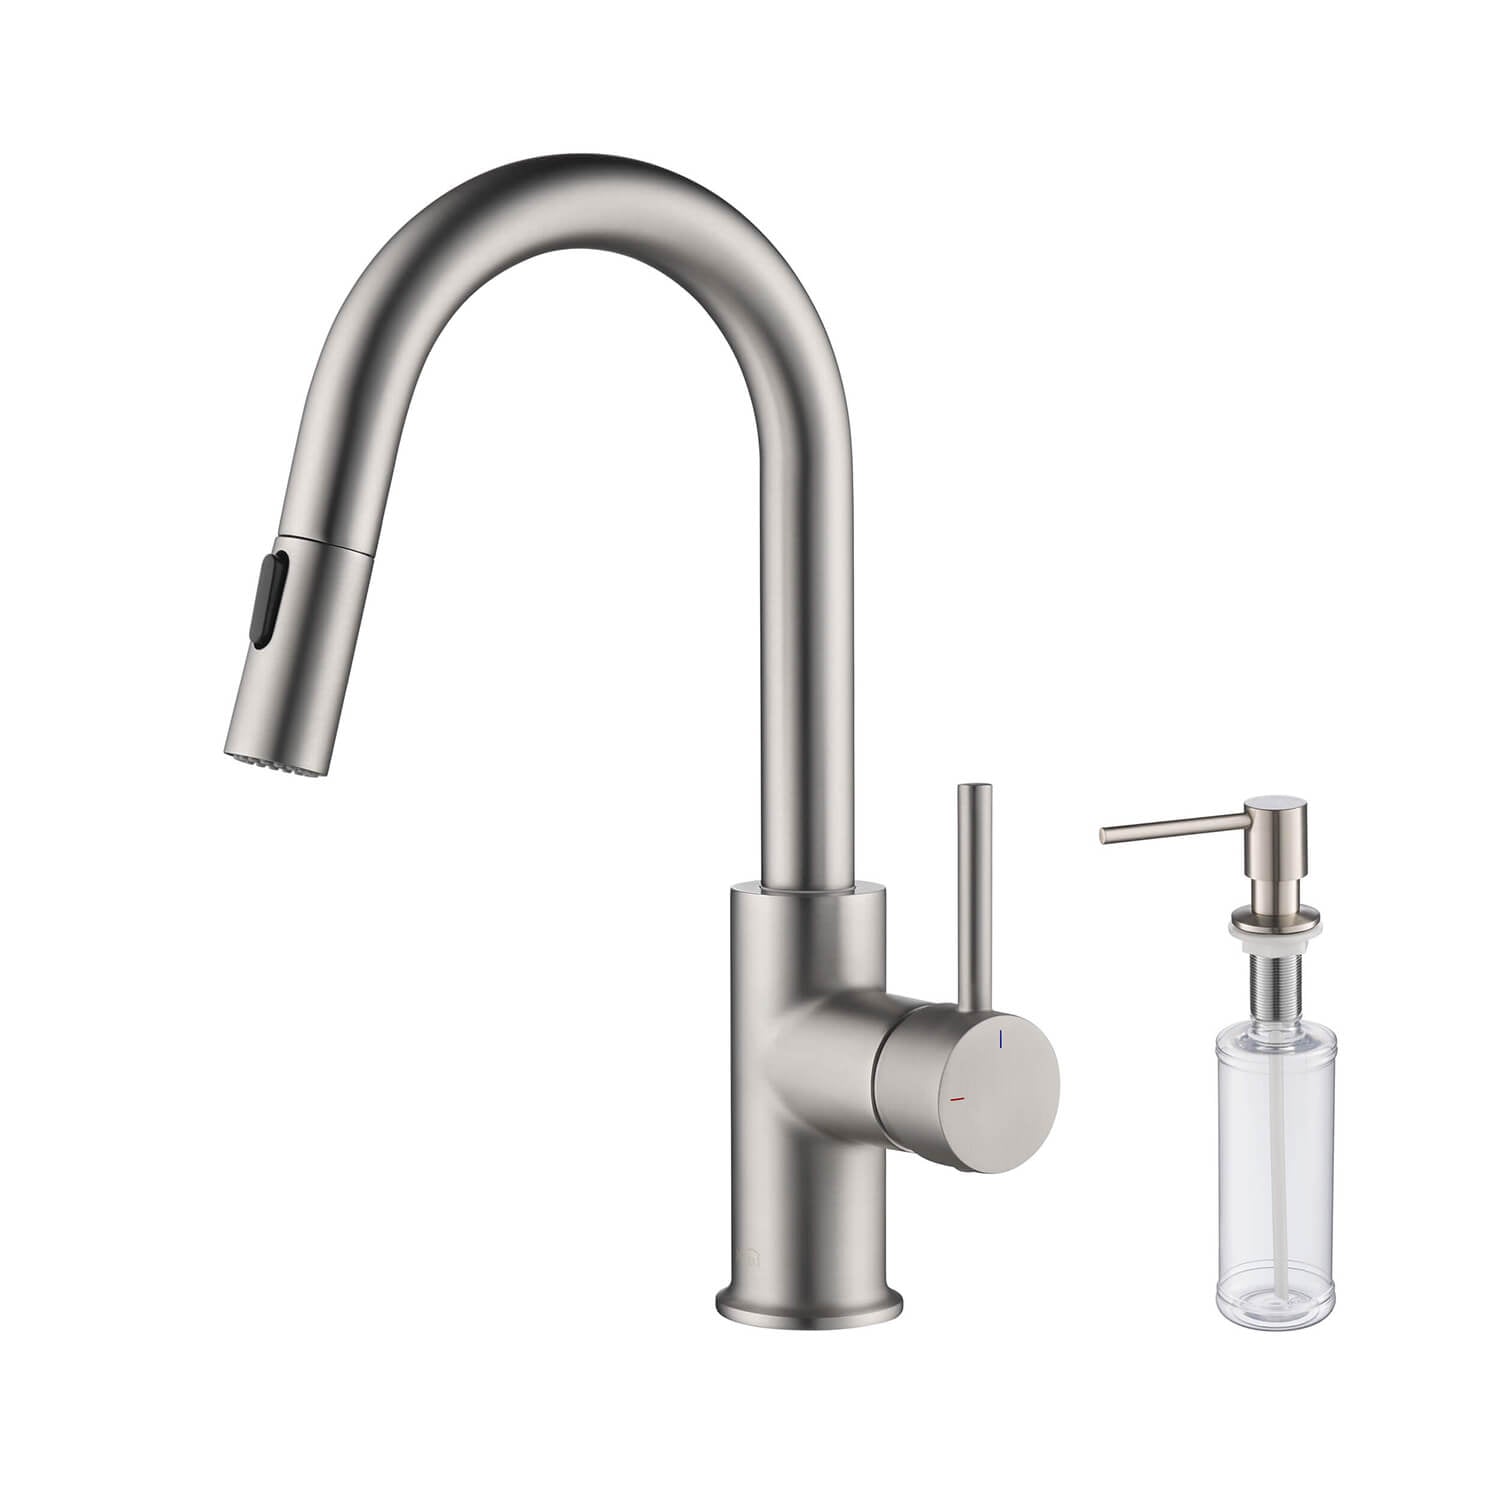 Kibi Luxe Single Handle High Arc Pull Down Kitchen Faucet With Soap Dispenser in Brushed Nickel Finish